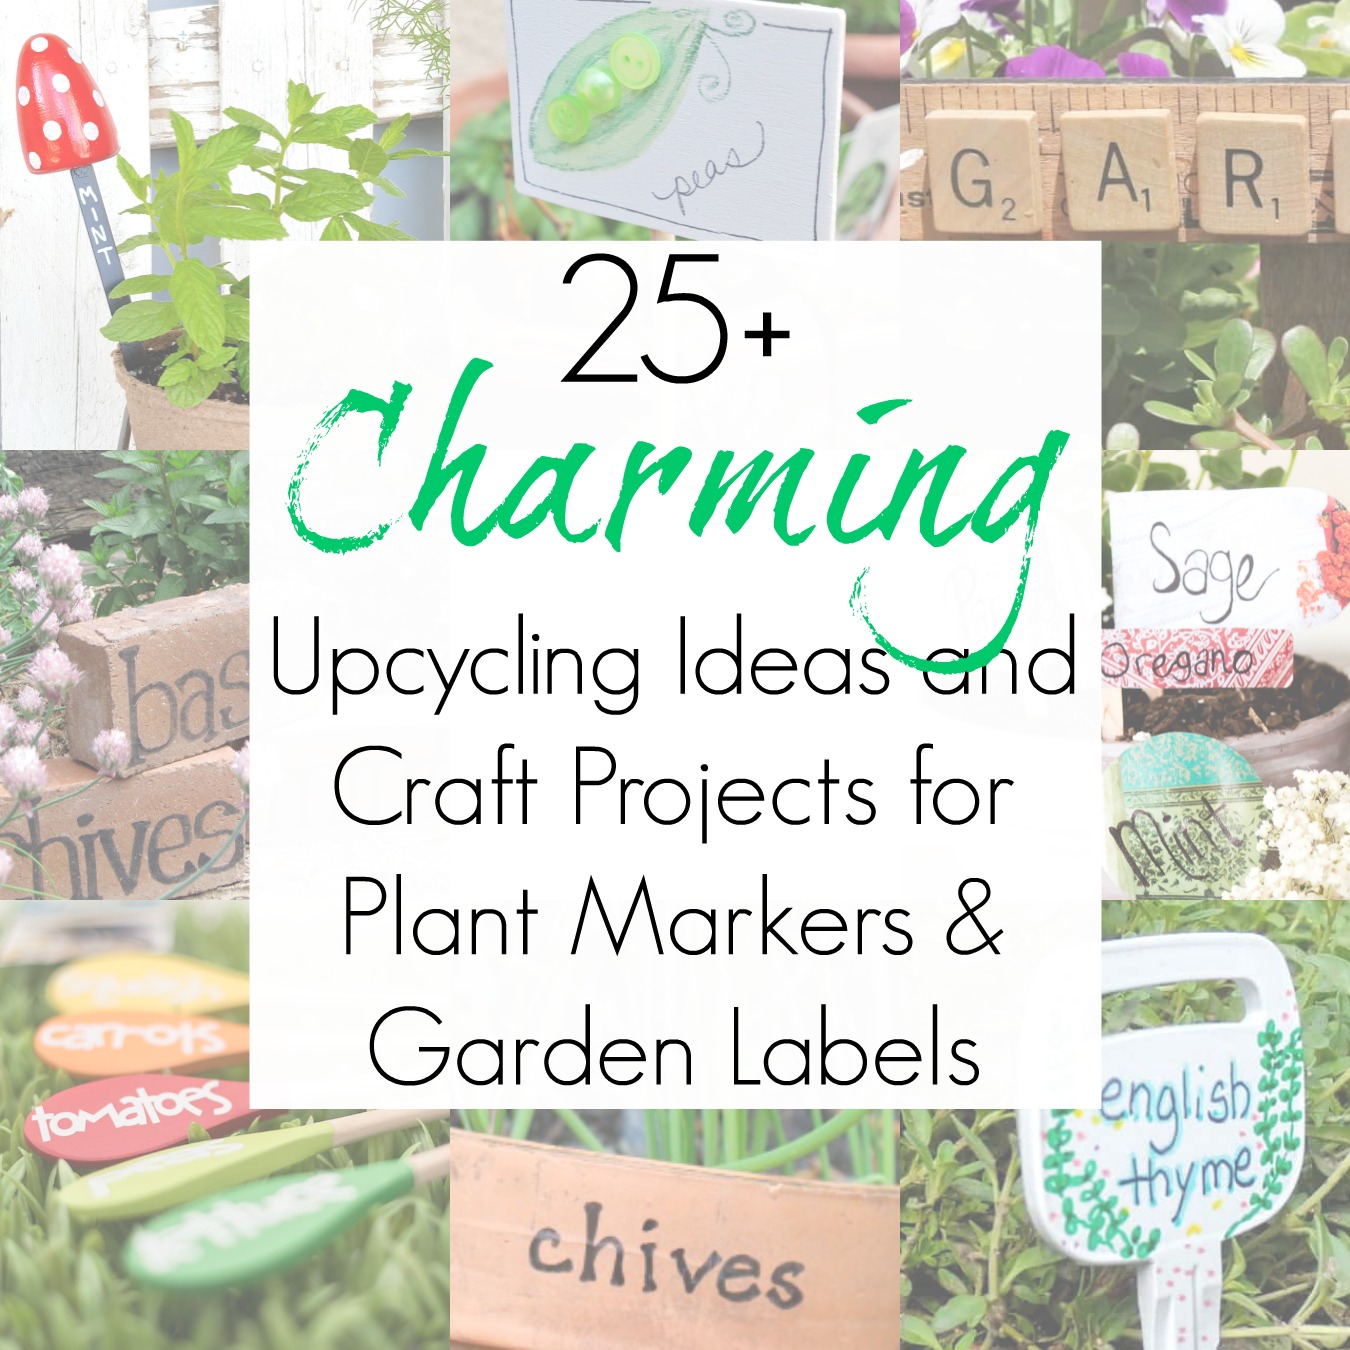 Upcycling Crafts for Garden Markers or Plant Labels